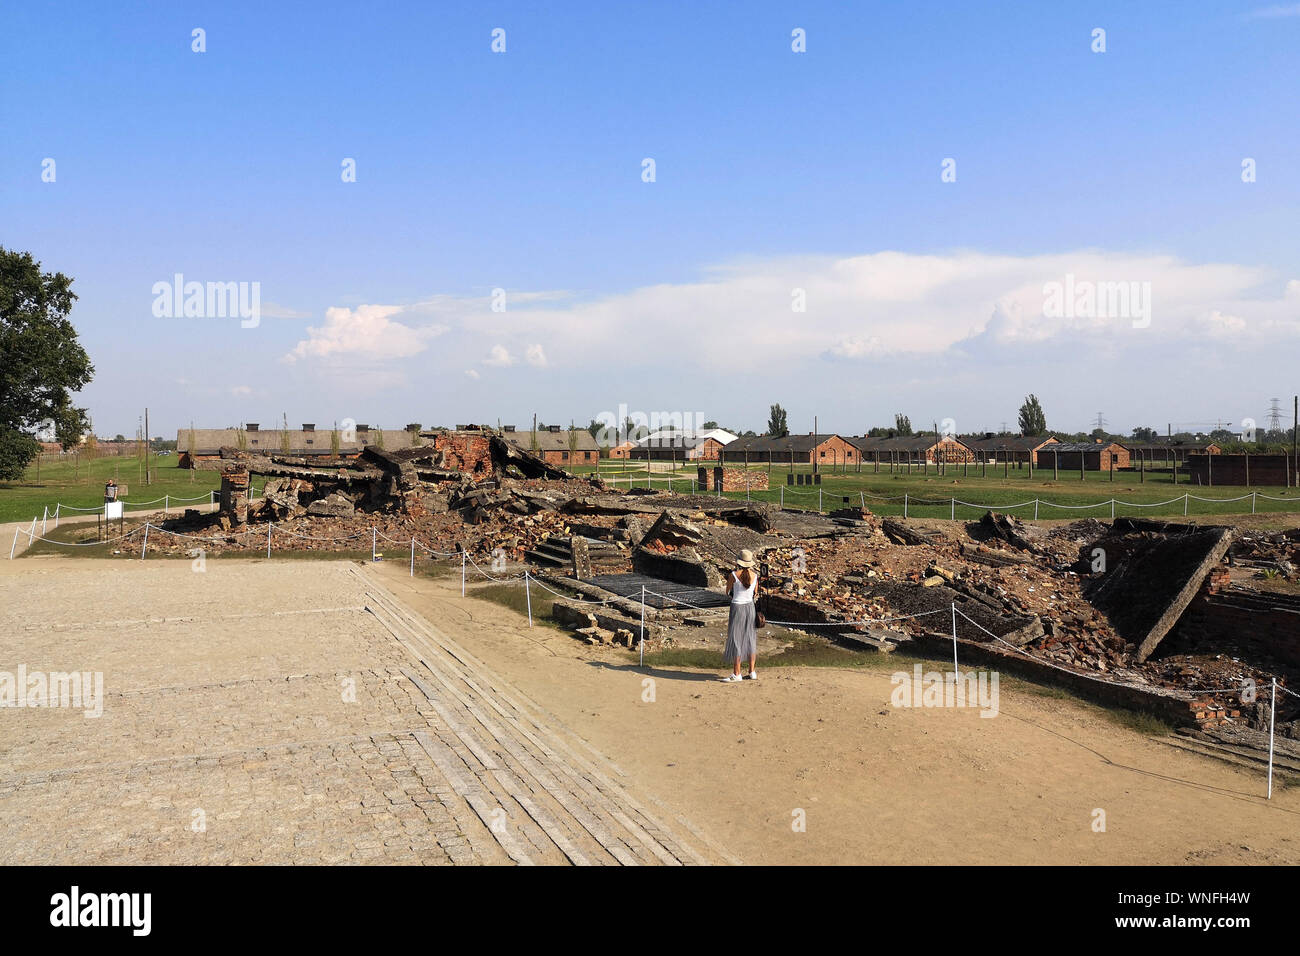 Ruins of Gas Chambers and Crematoria II and III at Auschwitz II - Birkenau concentration and camp in Poland, on 29th August 2019. Stock Photo